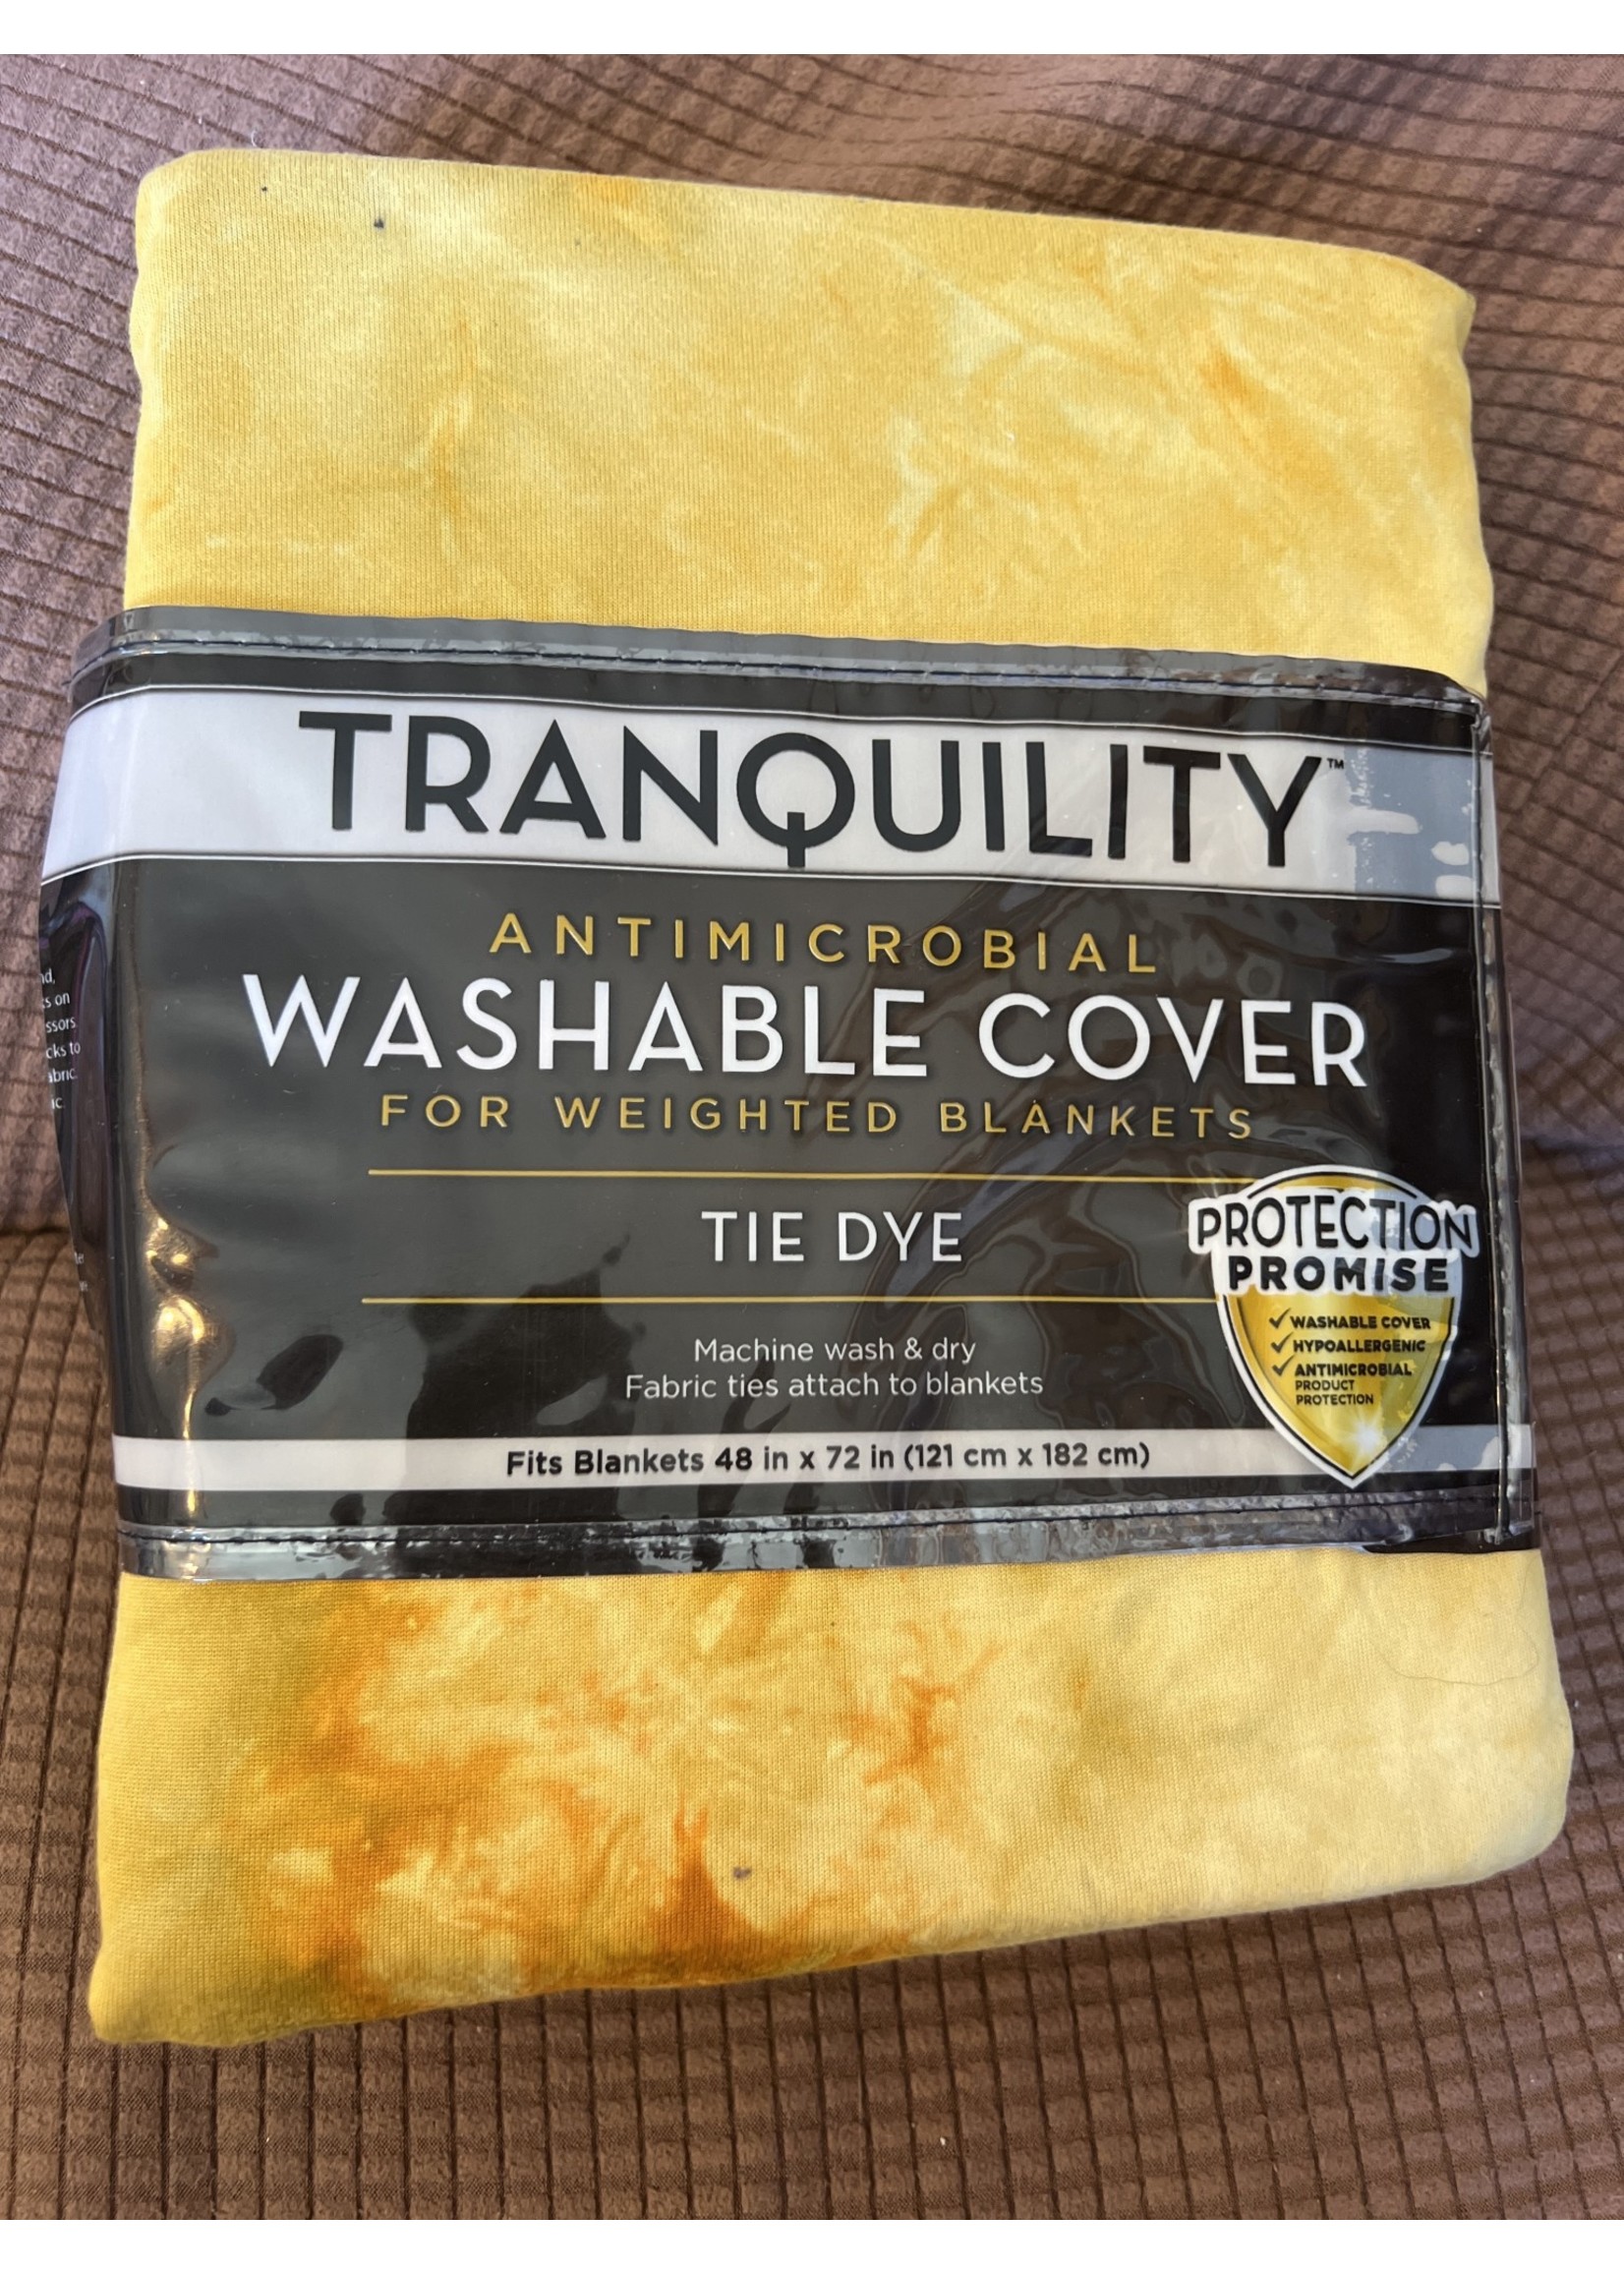 Tranquility Washable Cover for weighted blankets -Tie Dye Yellow